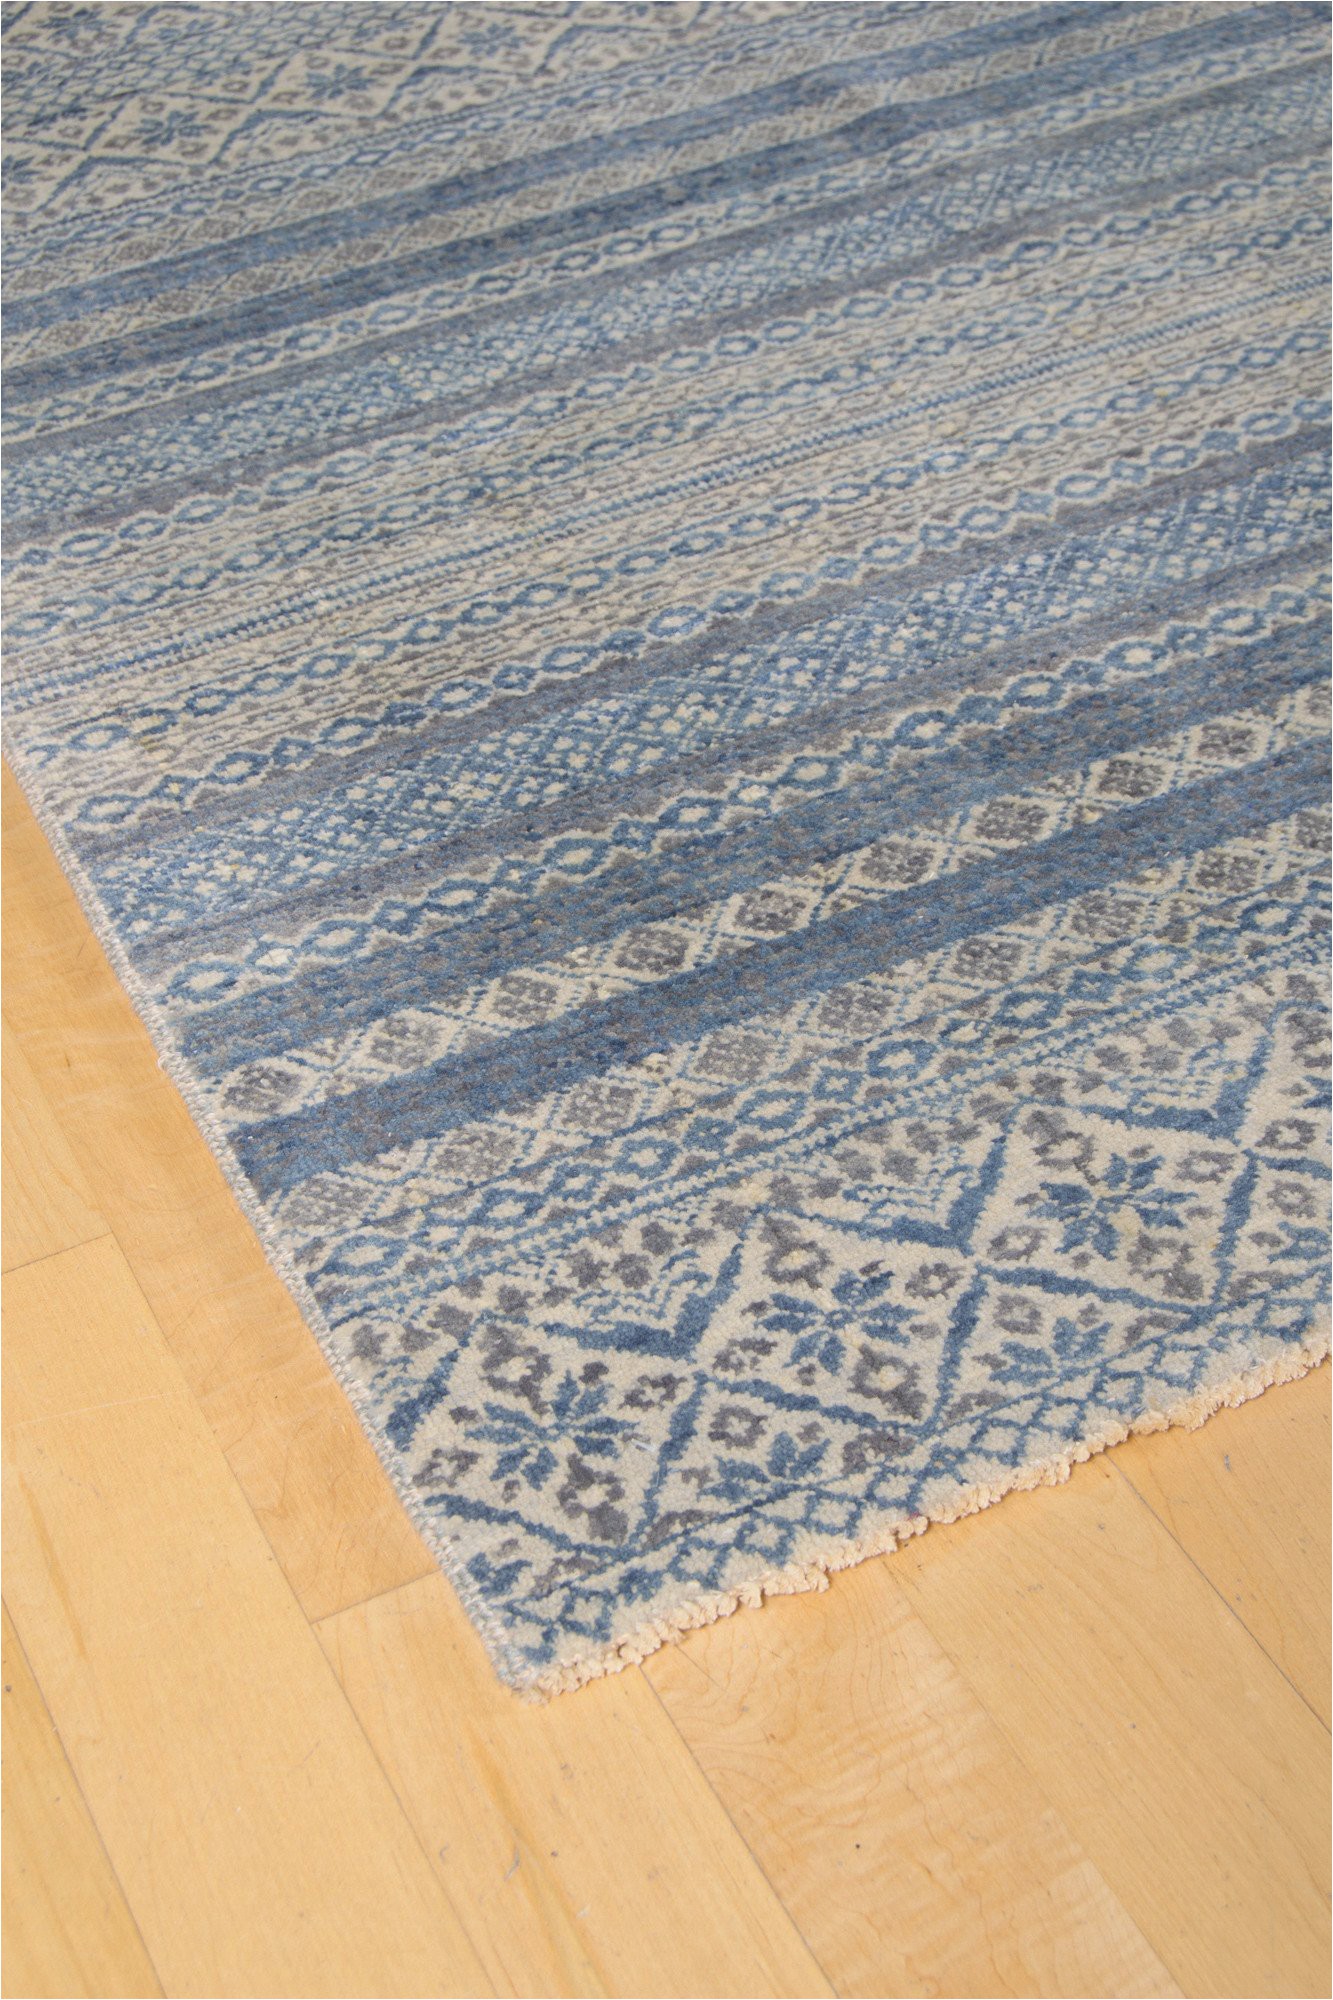 Blue and White Striped Rug 8×10 Blue & Grey Striped Rug 8×10 – the Artisan S Bench